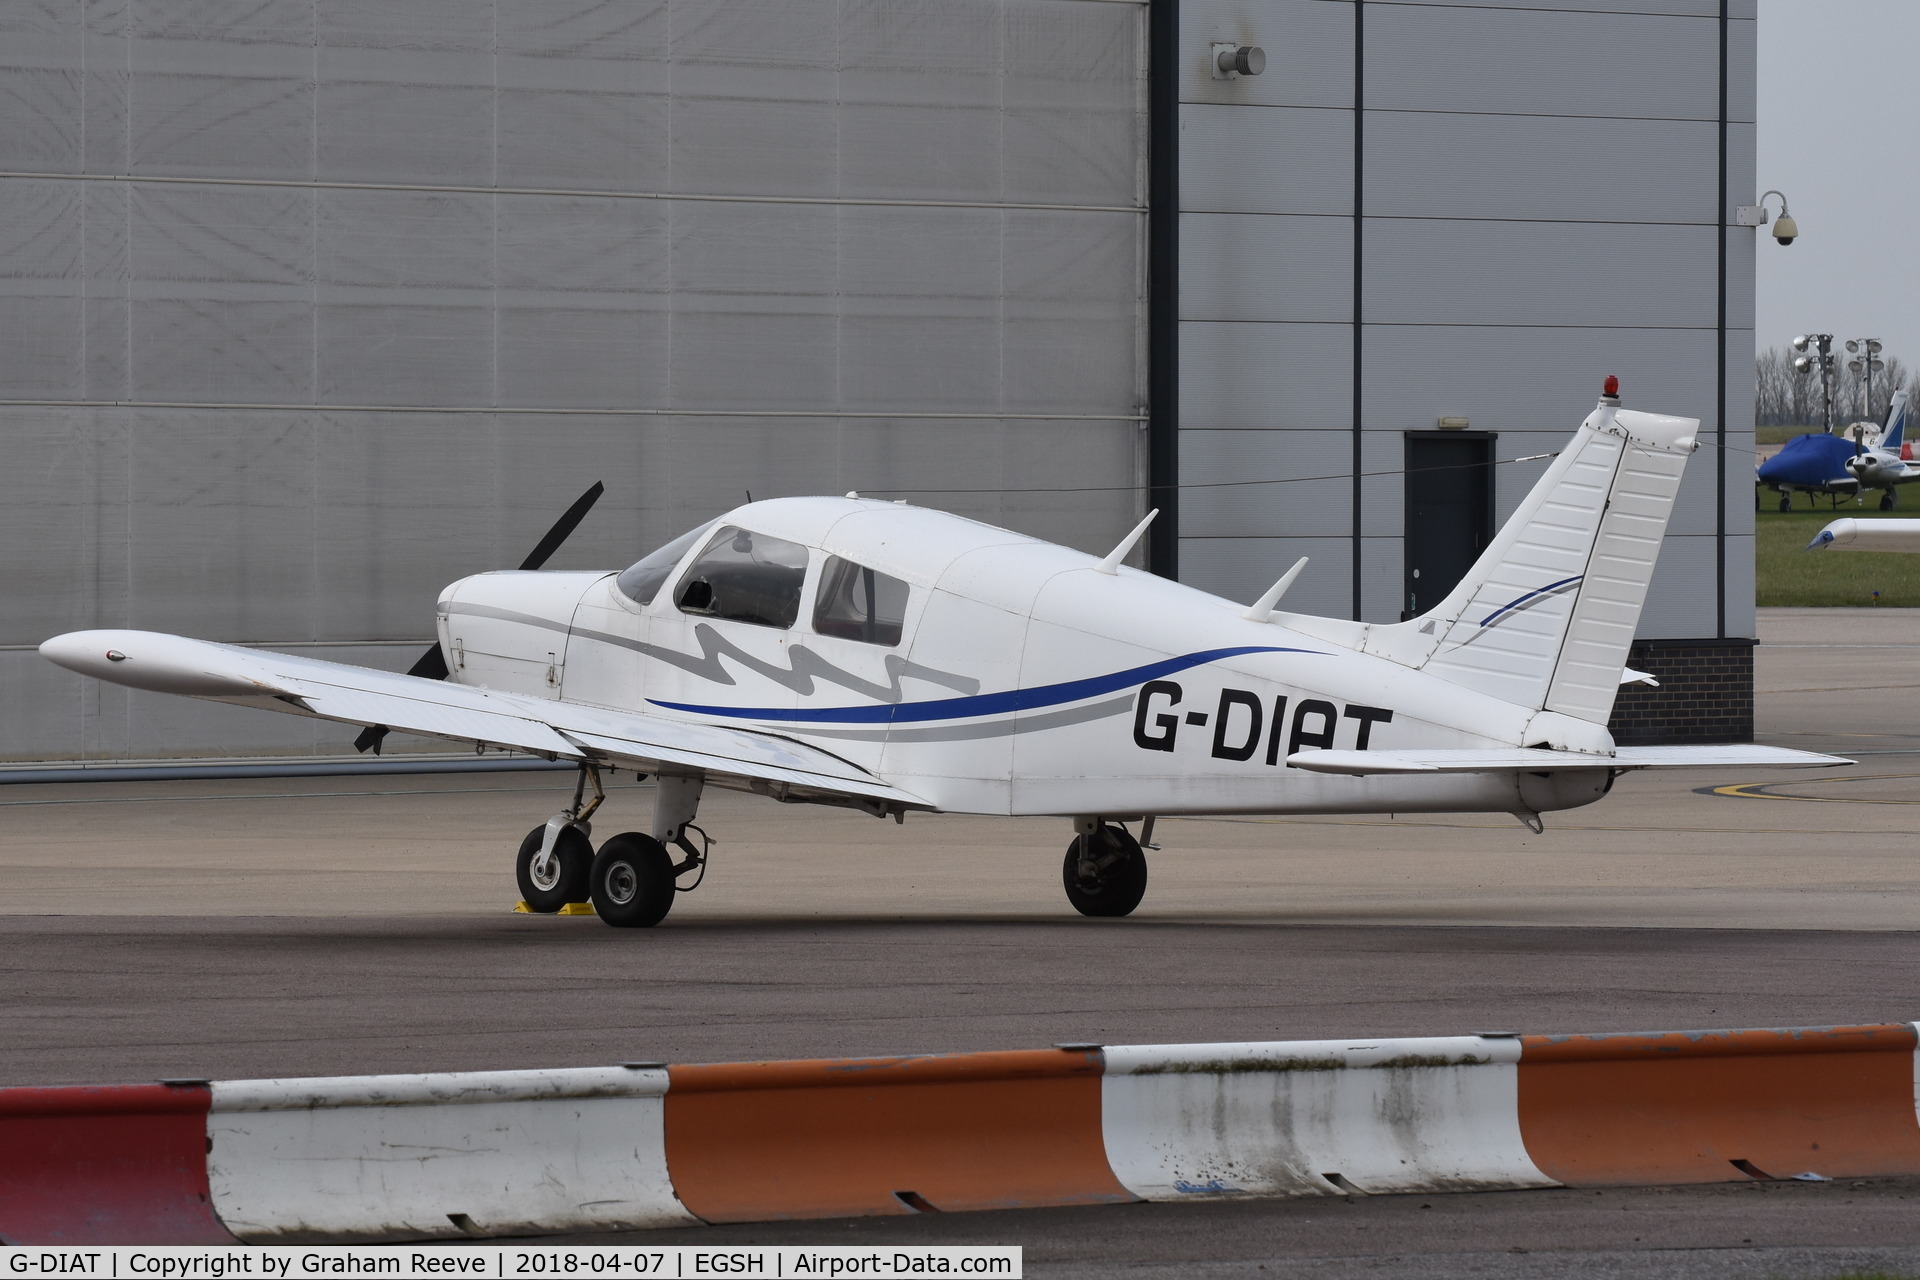 G-DIAT, 1974 Piper PA-28-140 Cherokee Cruiser C/N 28-7425322, Parked at Norwich.